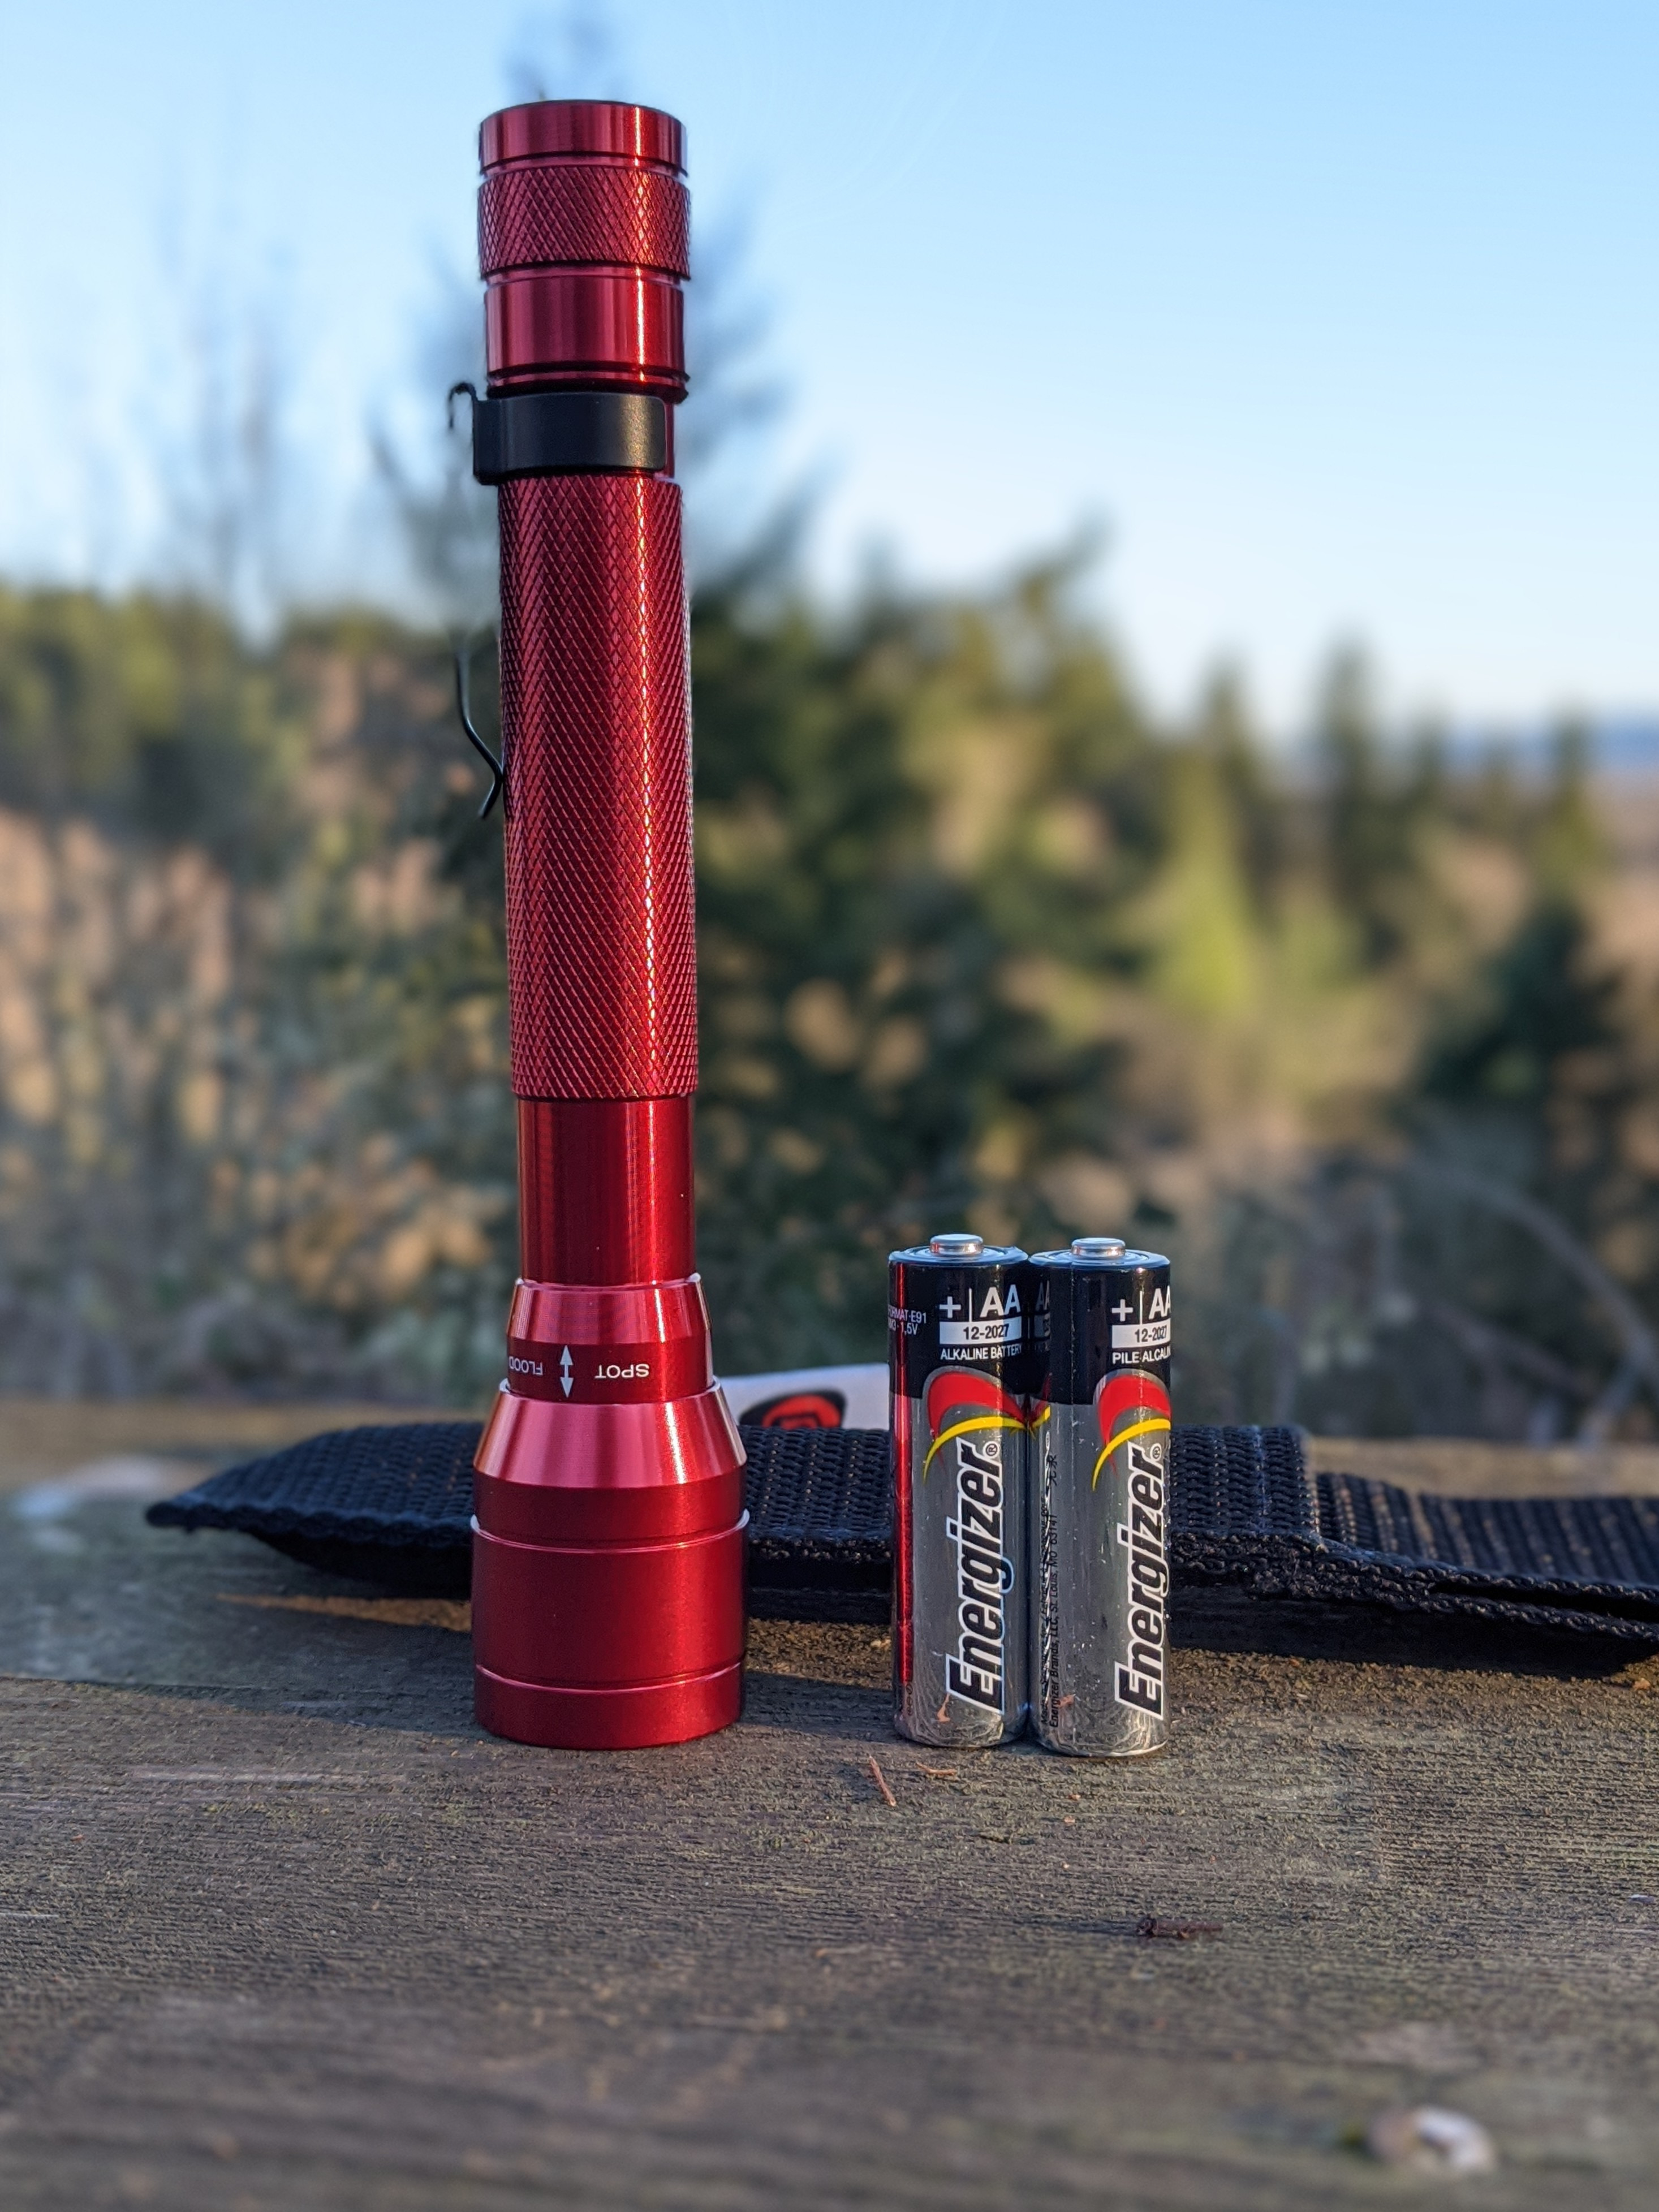 Streamlight JR. F-Stop: First look at this incredible little 